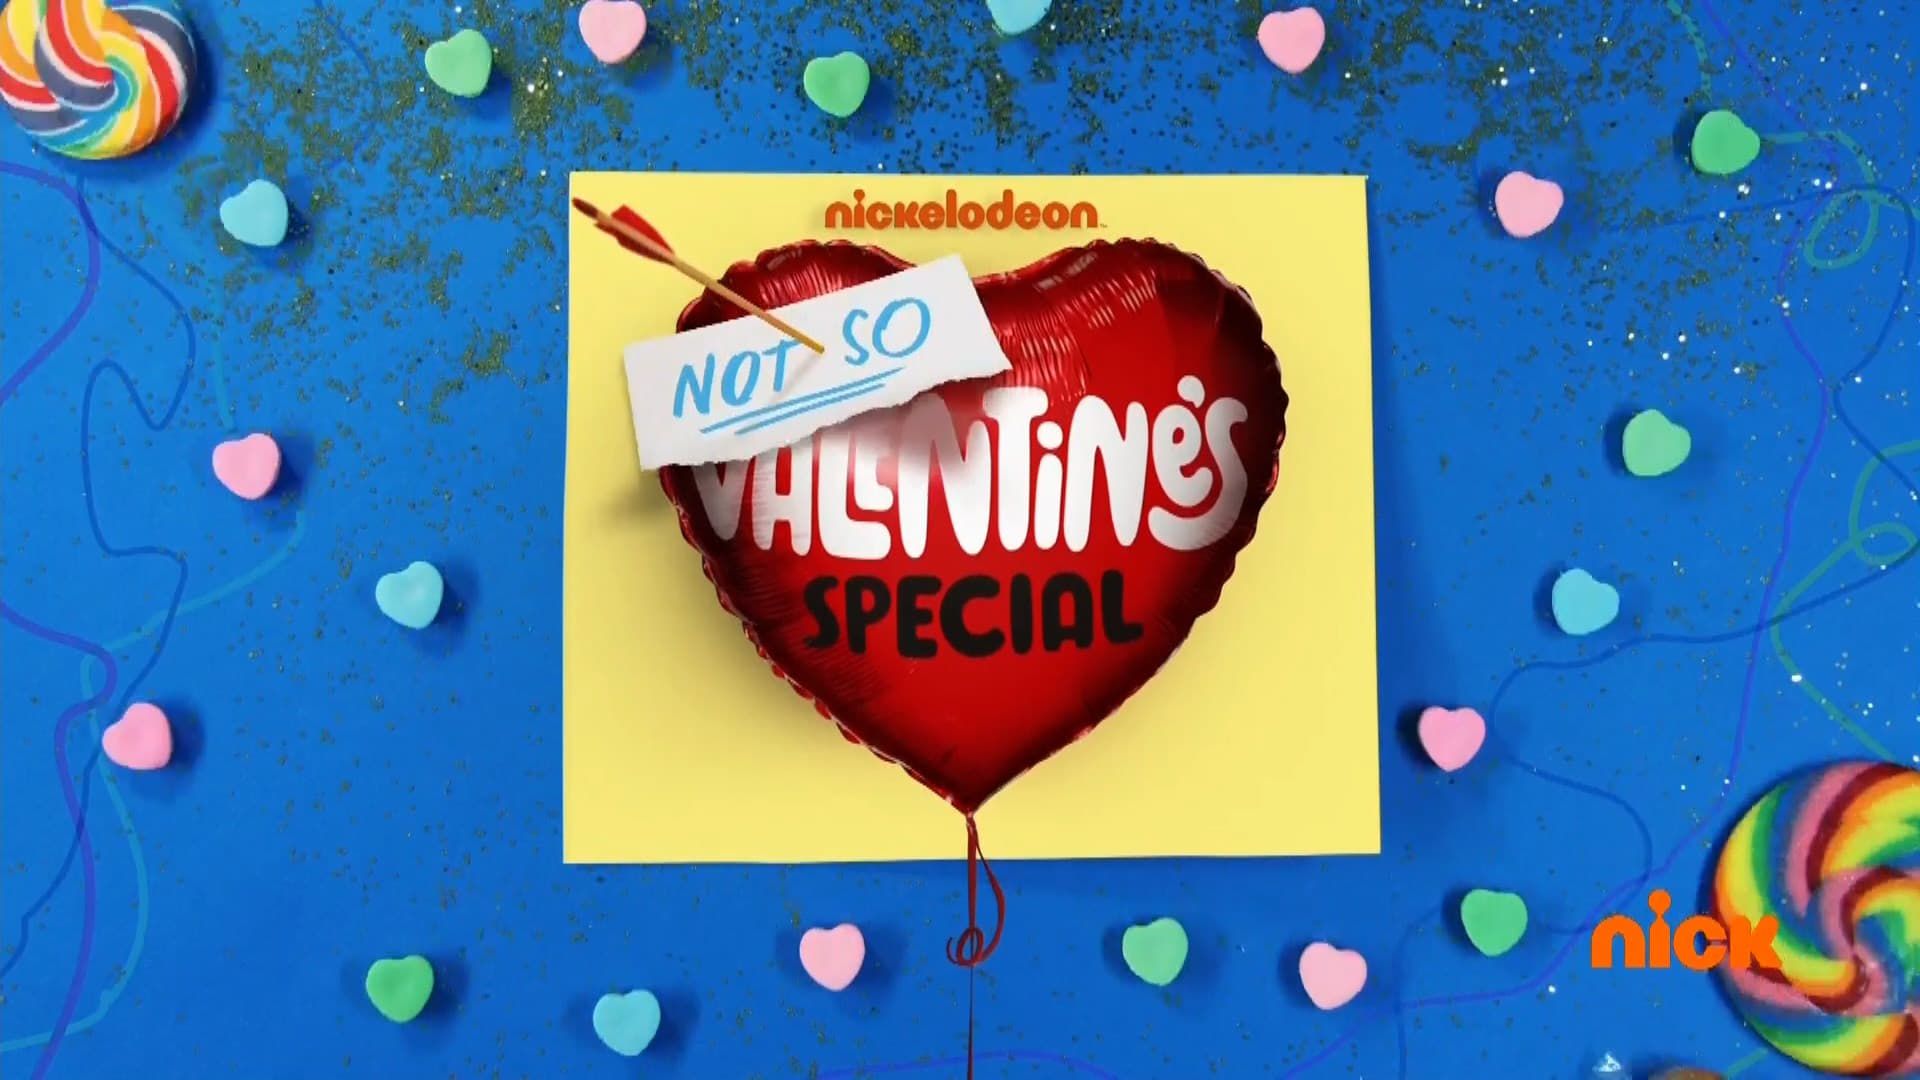 Nickelodeon's Not So Valentine's Special background